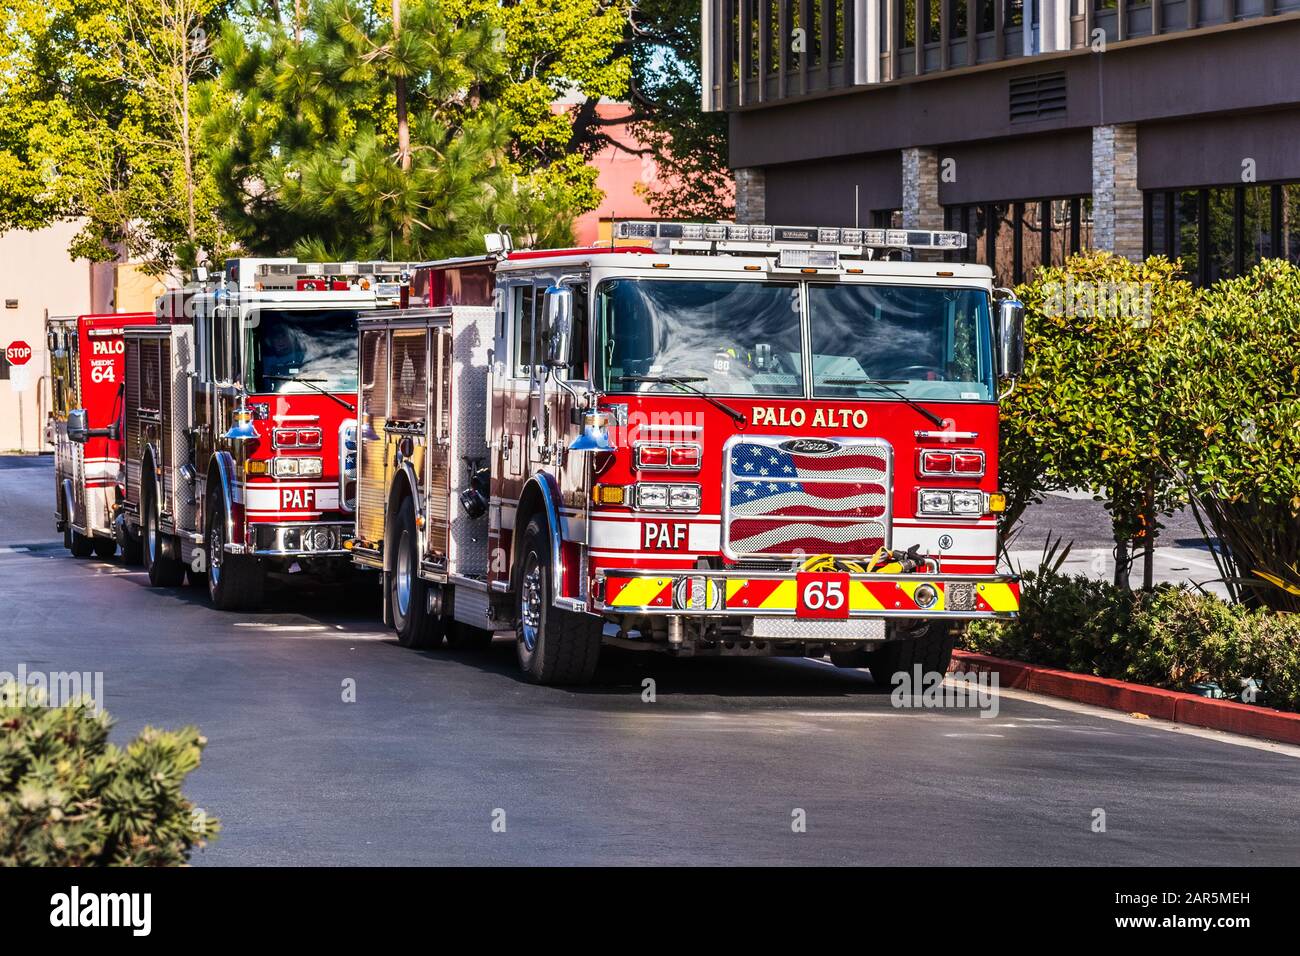 Jan 24, 2020 Mountain View / CA / USA - Palo Alto Fire Department vehicles stationed on a street; San Francisco bay area Stock Photo